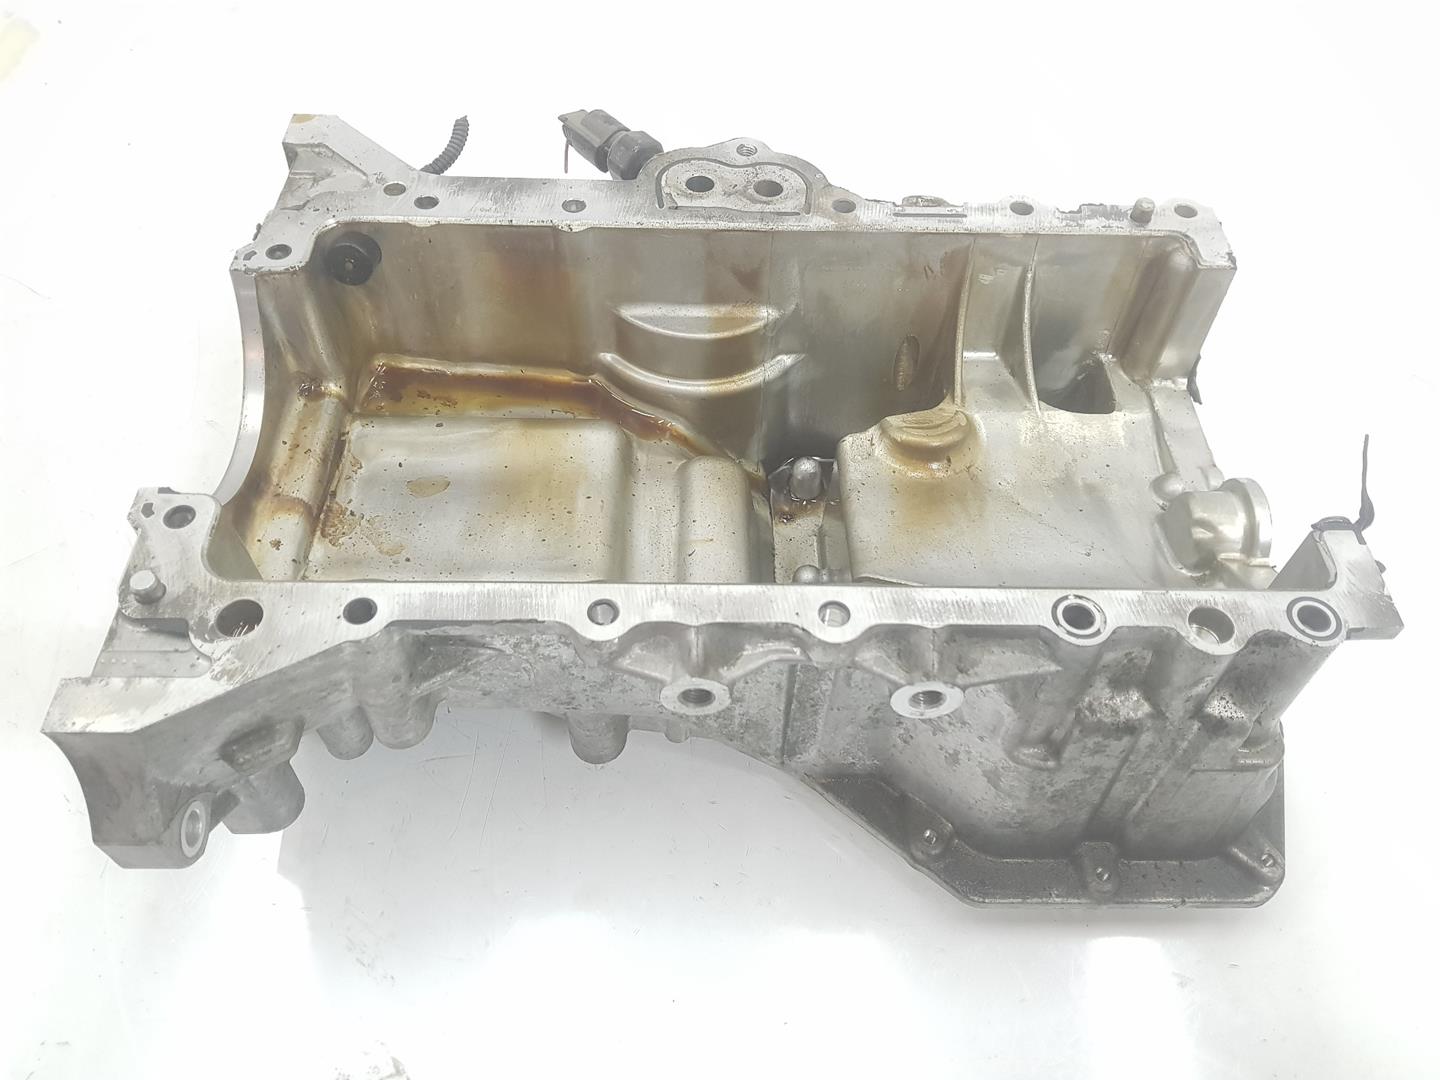 KIA Carens 3 generation (RP) (2013-2019) Other Engine Compartment Parts 276Y22BH, 279Y22BH, 1151CB 24907880